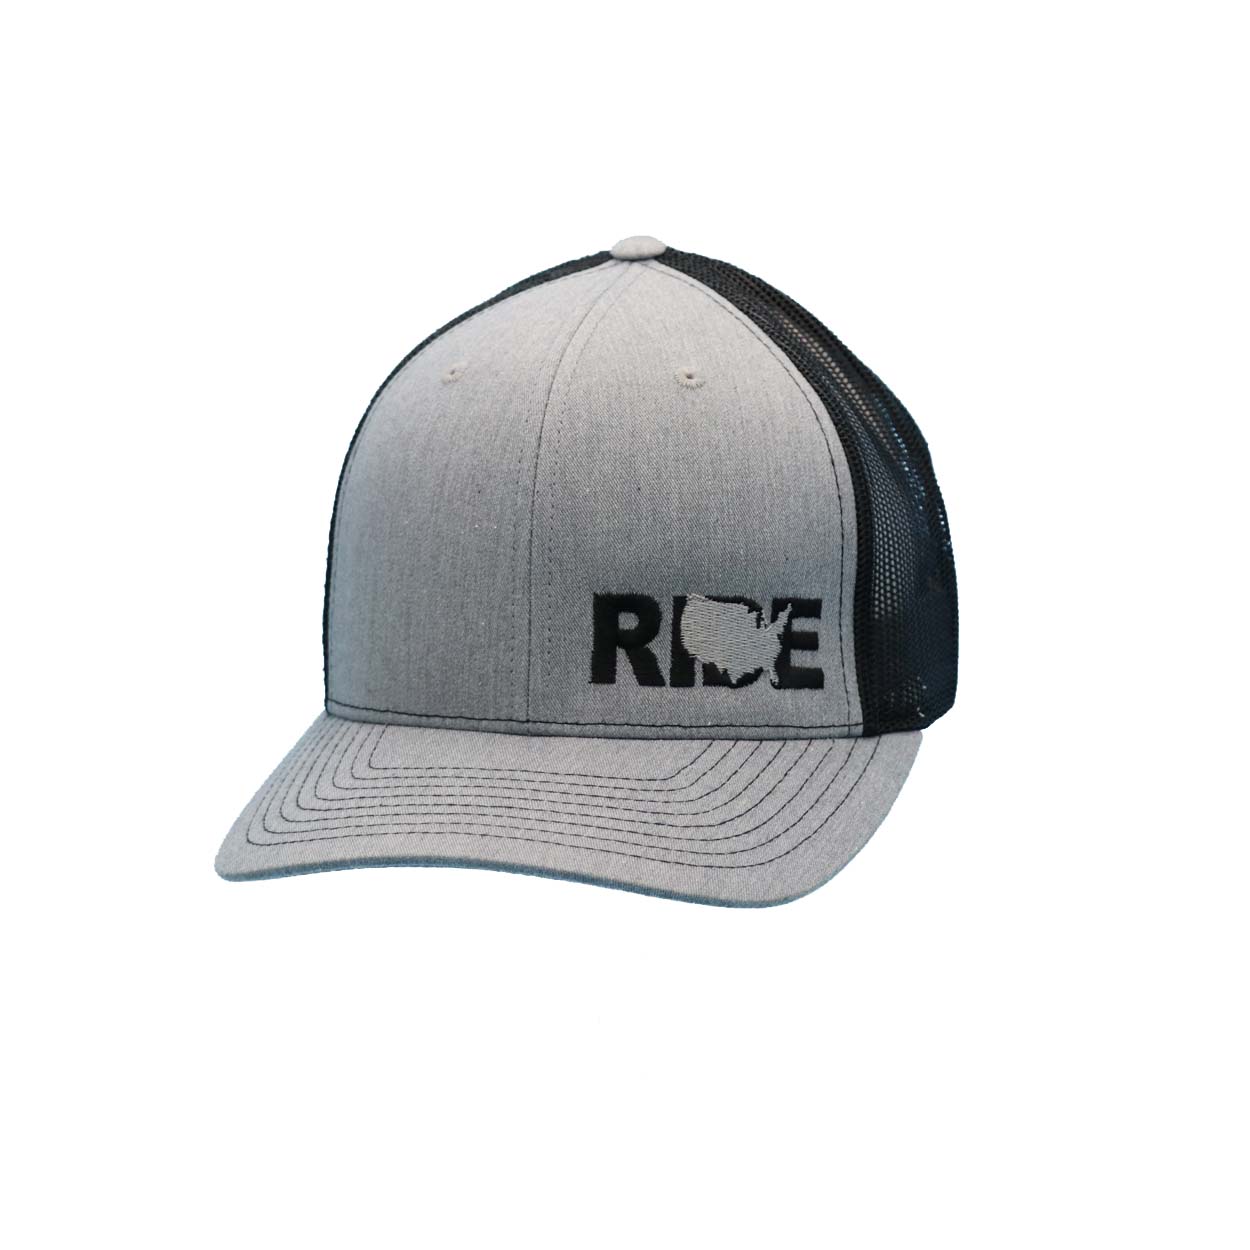 Ride United States Night Out Embroidered Snapback Trucker Hat Heather Gray/Black